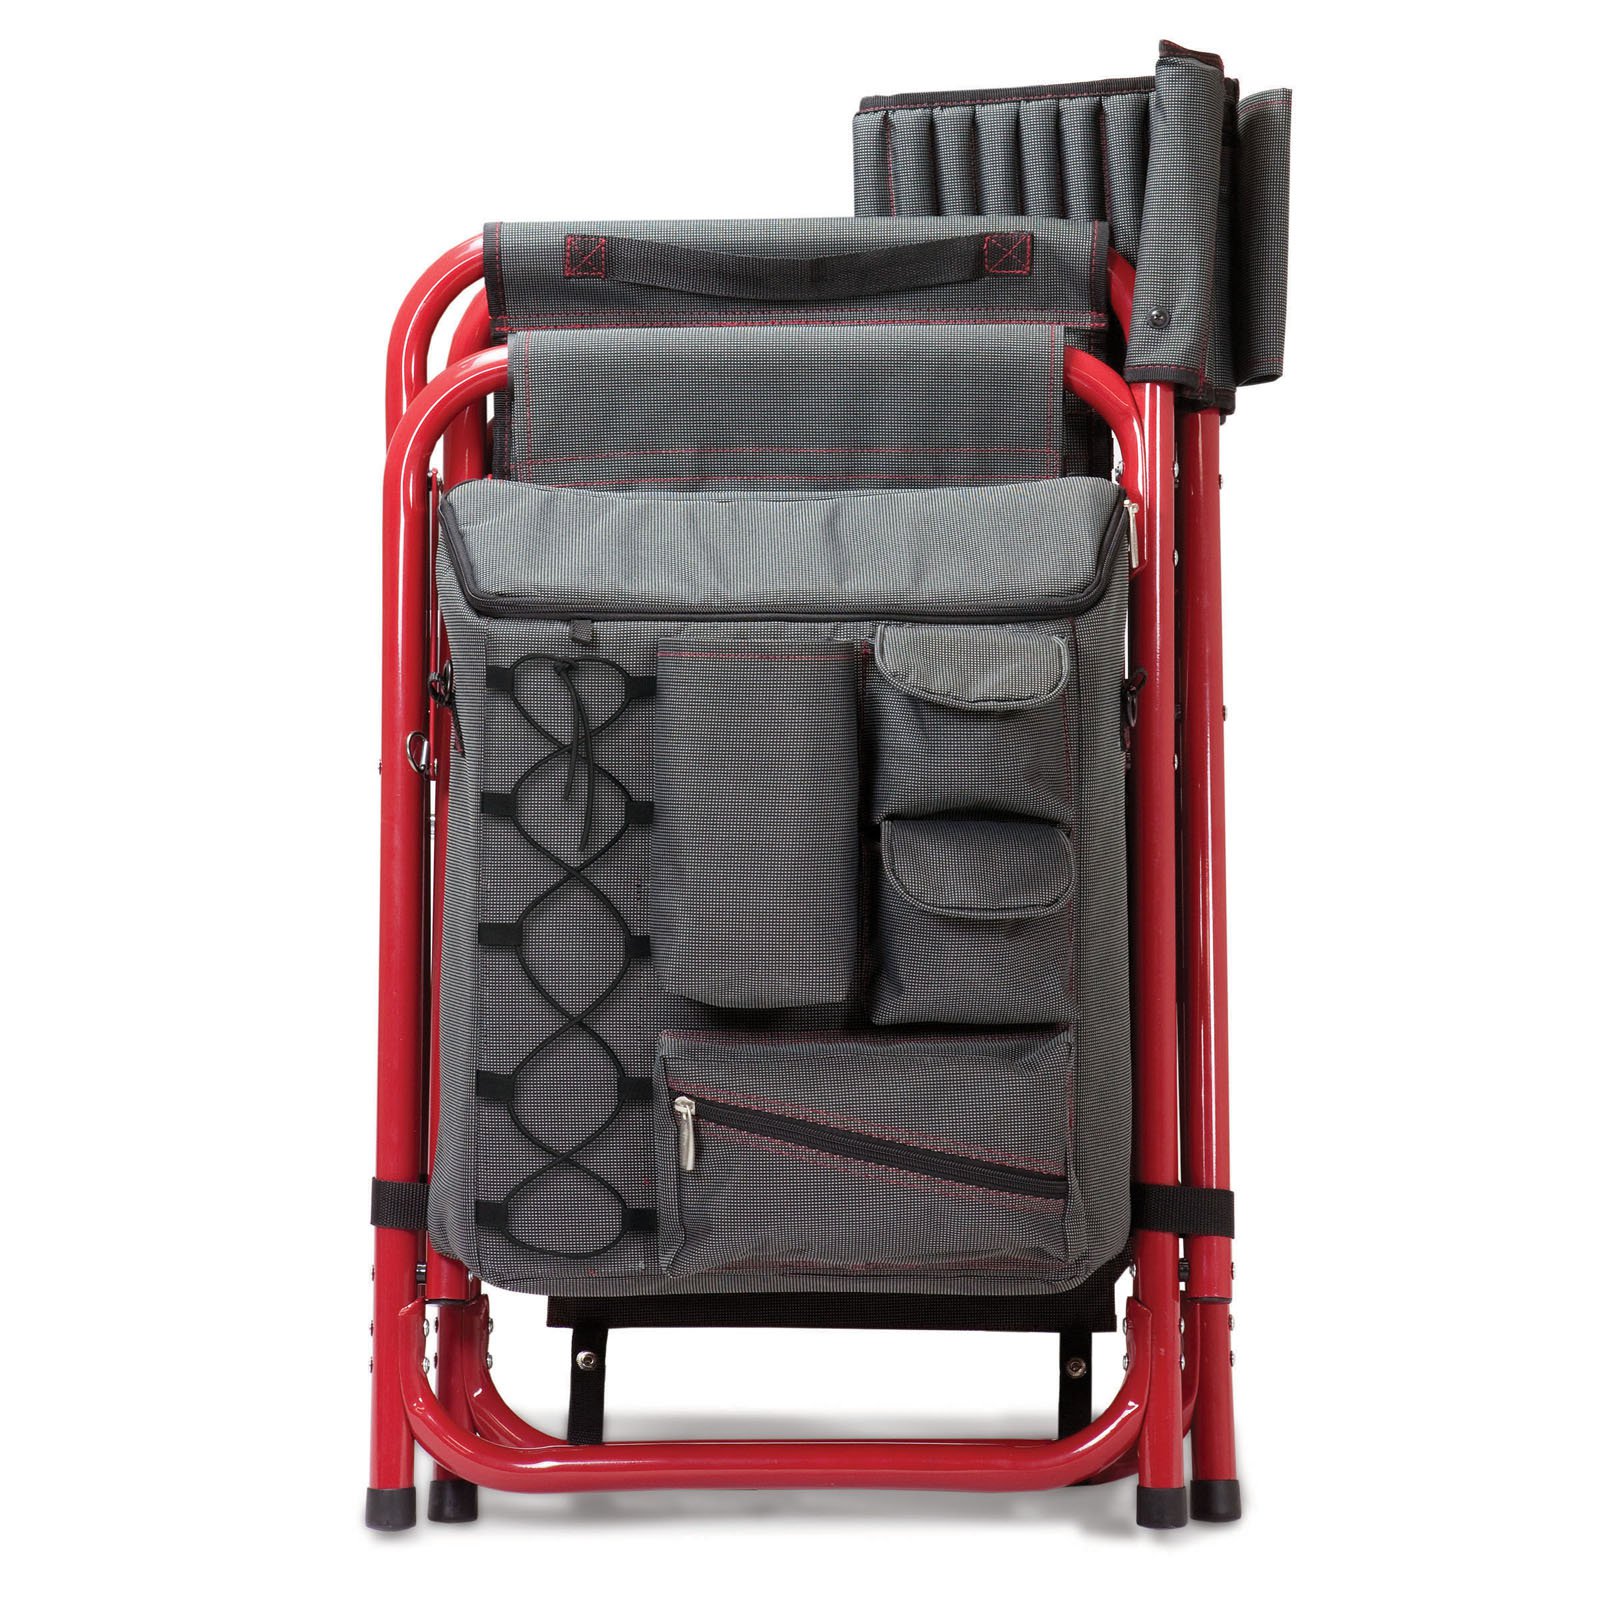 Picnic Time Fusion Directors Chair - Dark Gray with Red - image 3 of 4